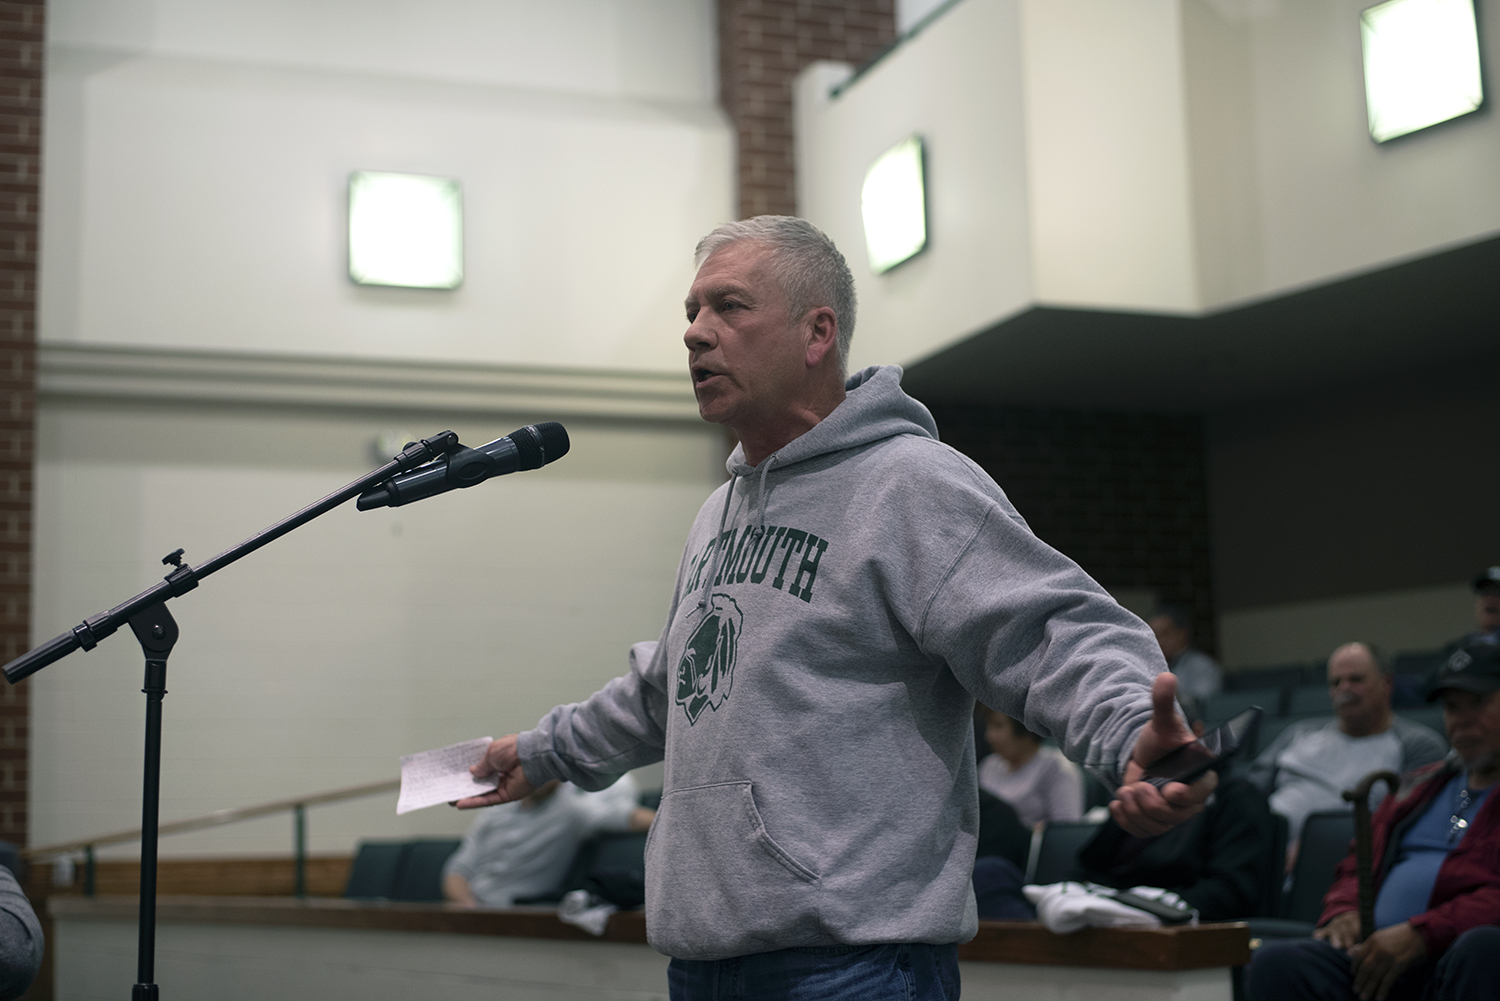 George Marcotte, a Republican activist who helped lead the Defend Dartmouth campaign, spoke at a hearing about the logo in March.